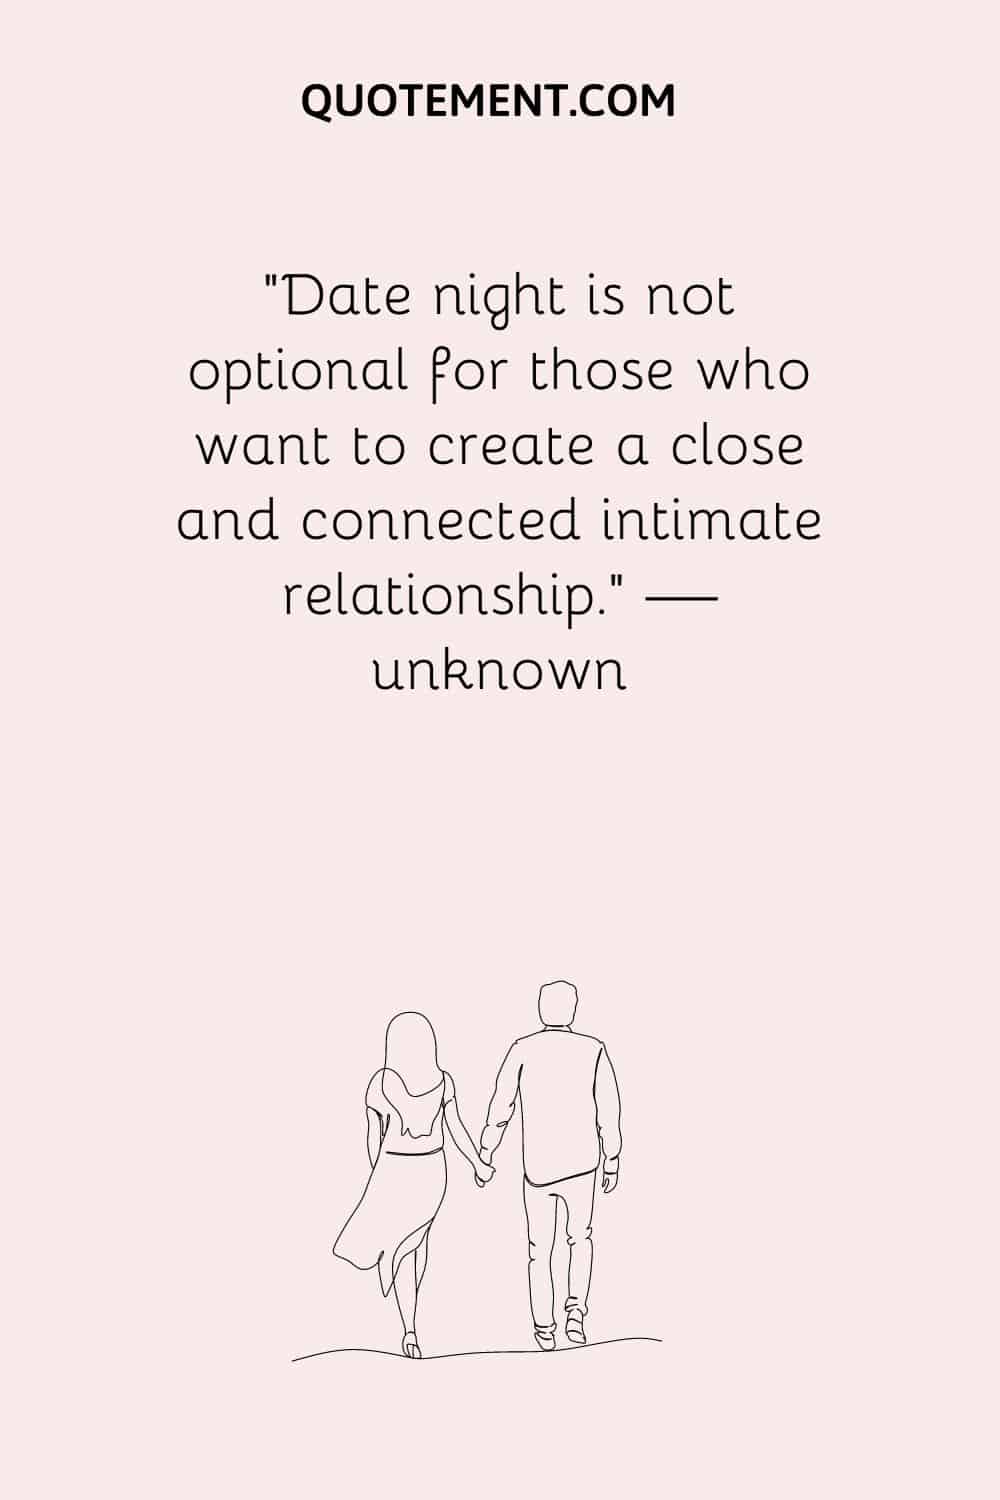 Date night is not optional for those who want to create a close and connected intimate relationship